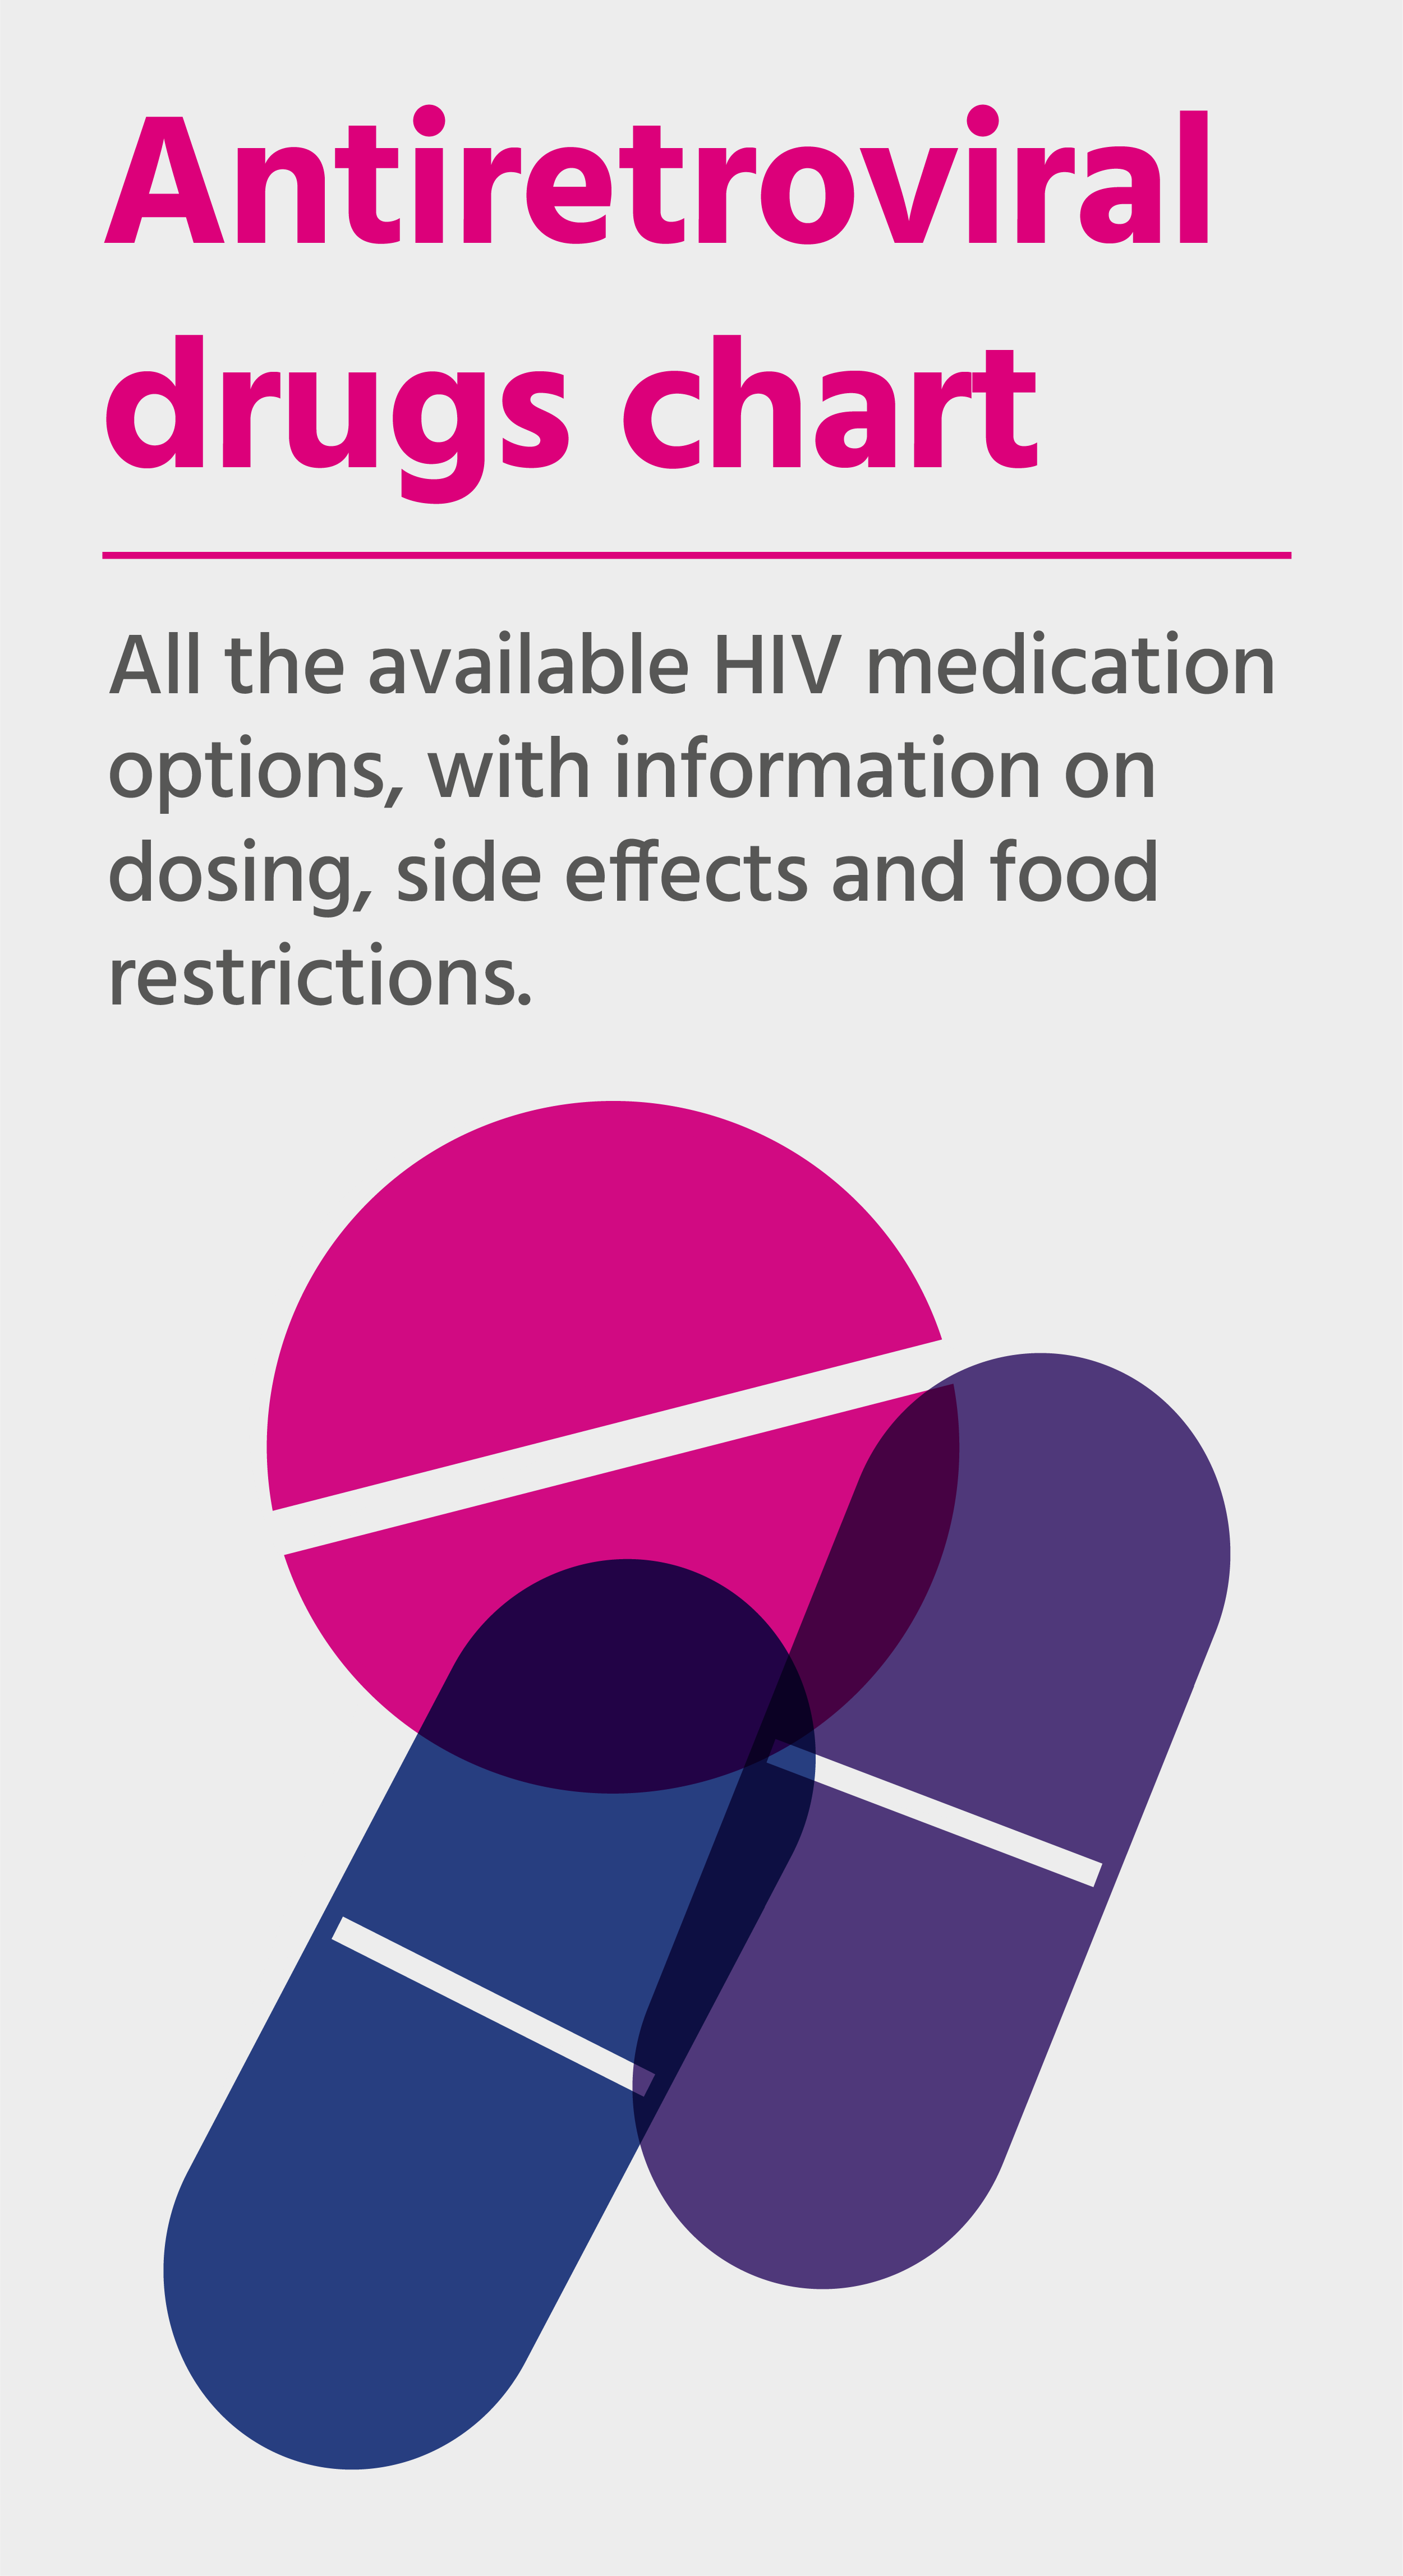 Icons of medication. The text reads: “Antiretroviral drugs chart: All the available HIV medication options, with information on dosing, side effects and food restrictions.